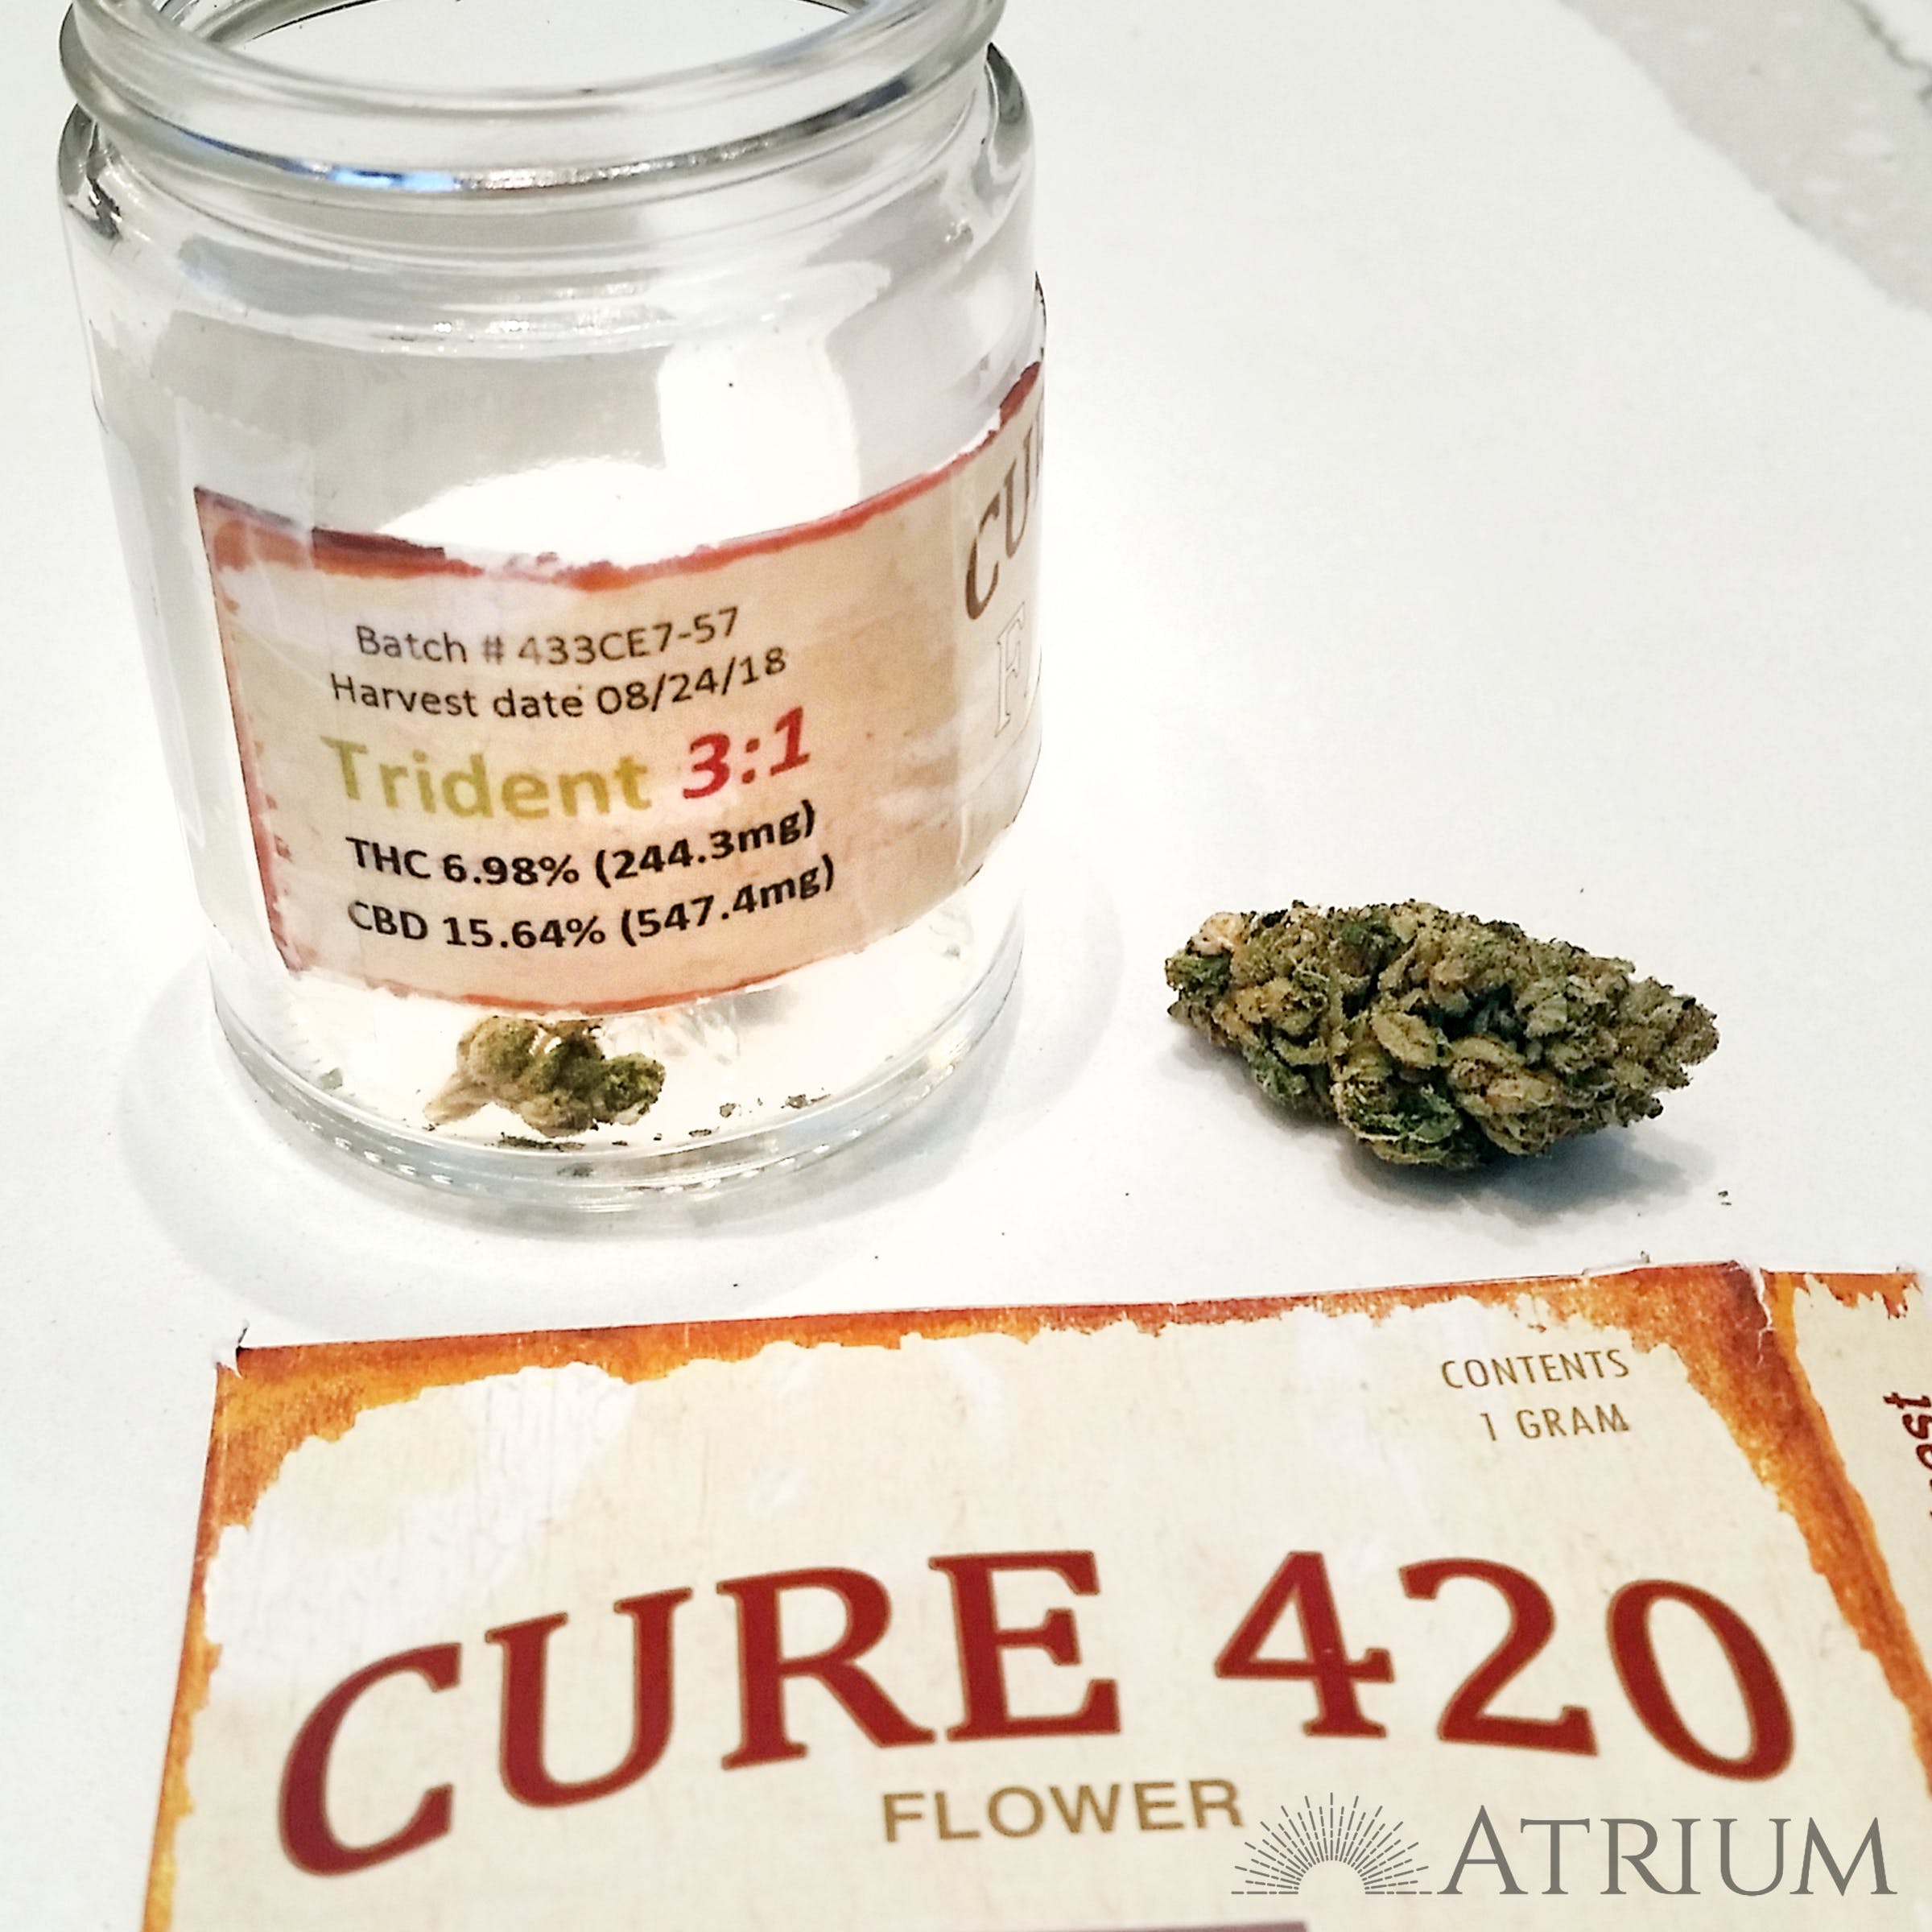 Cure 420 - Trident 3:1